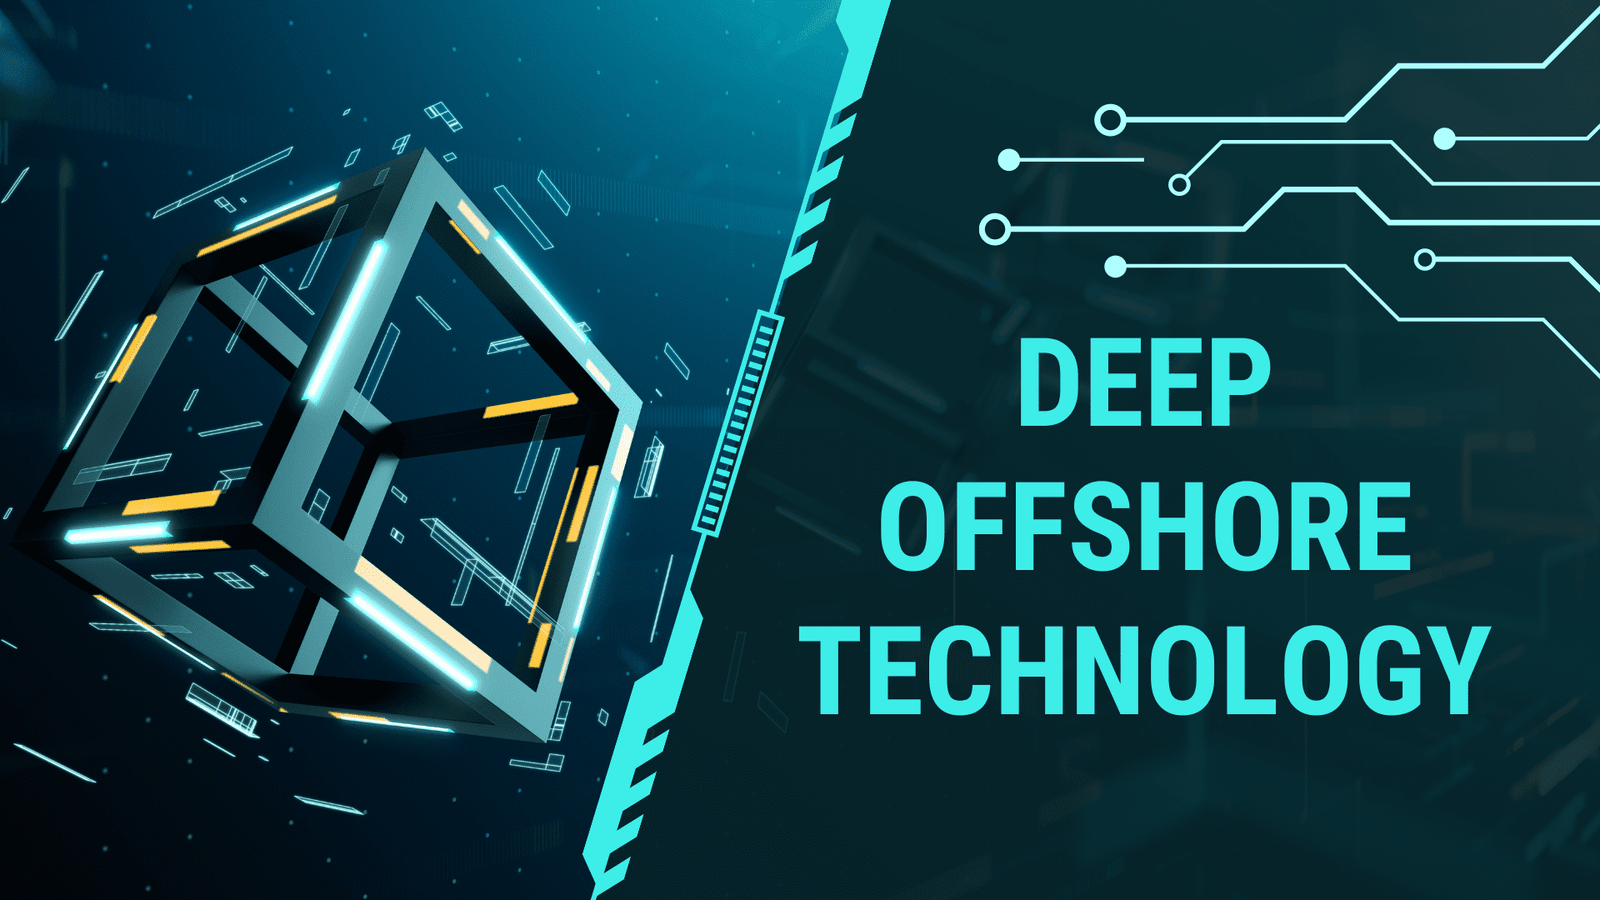 Offshore means a depth of water of about 200+ meters; whereas offshore technology refers to maintaining the complete system in the deep of water. It is also called deep water _drilling technology.